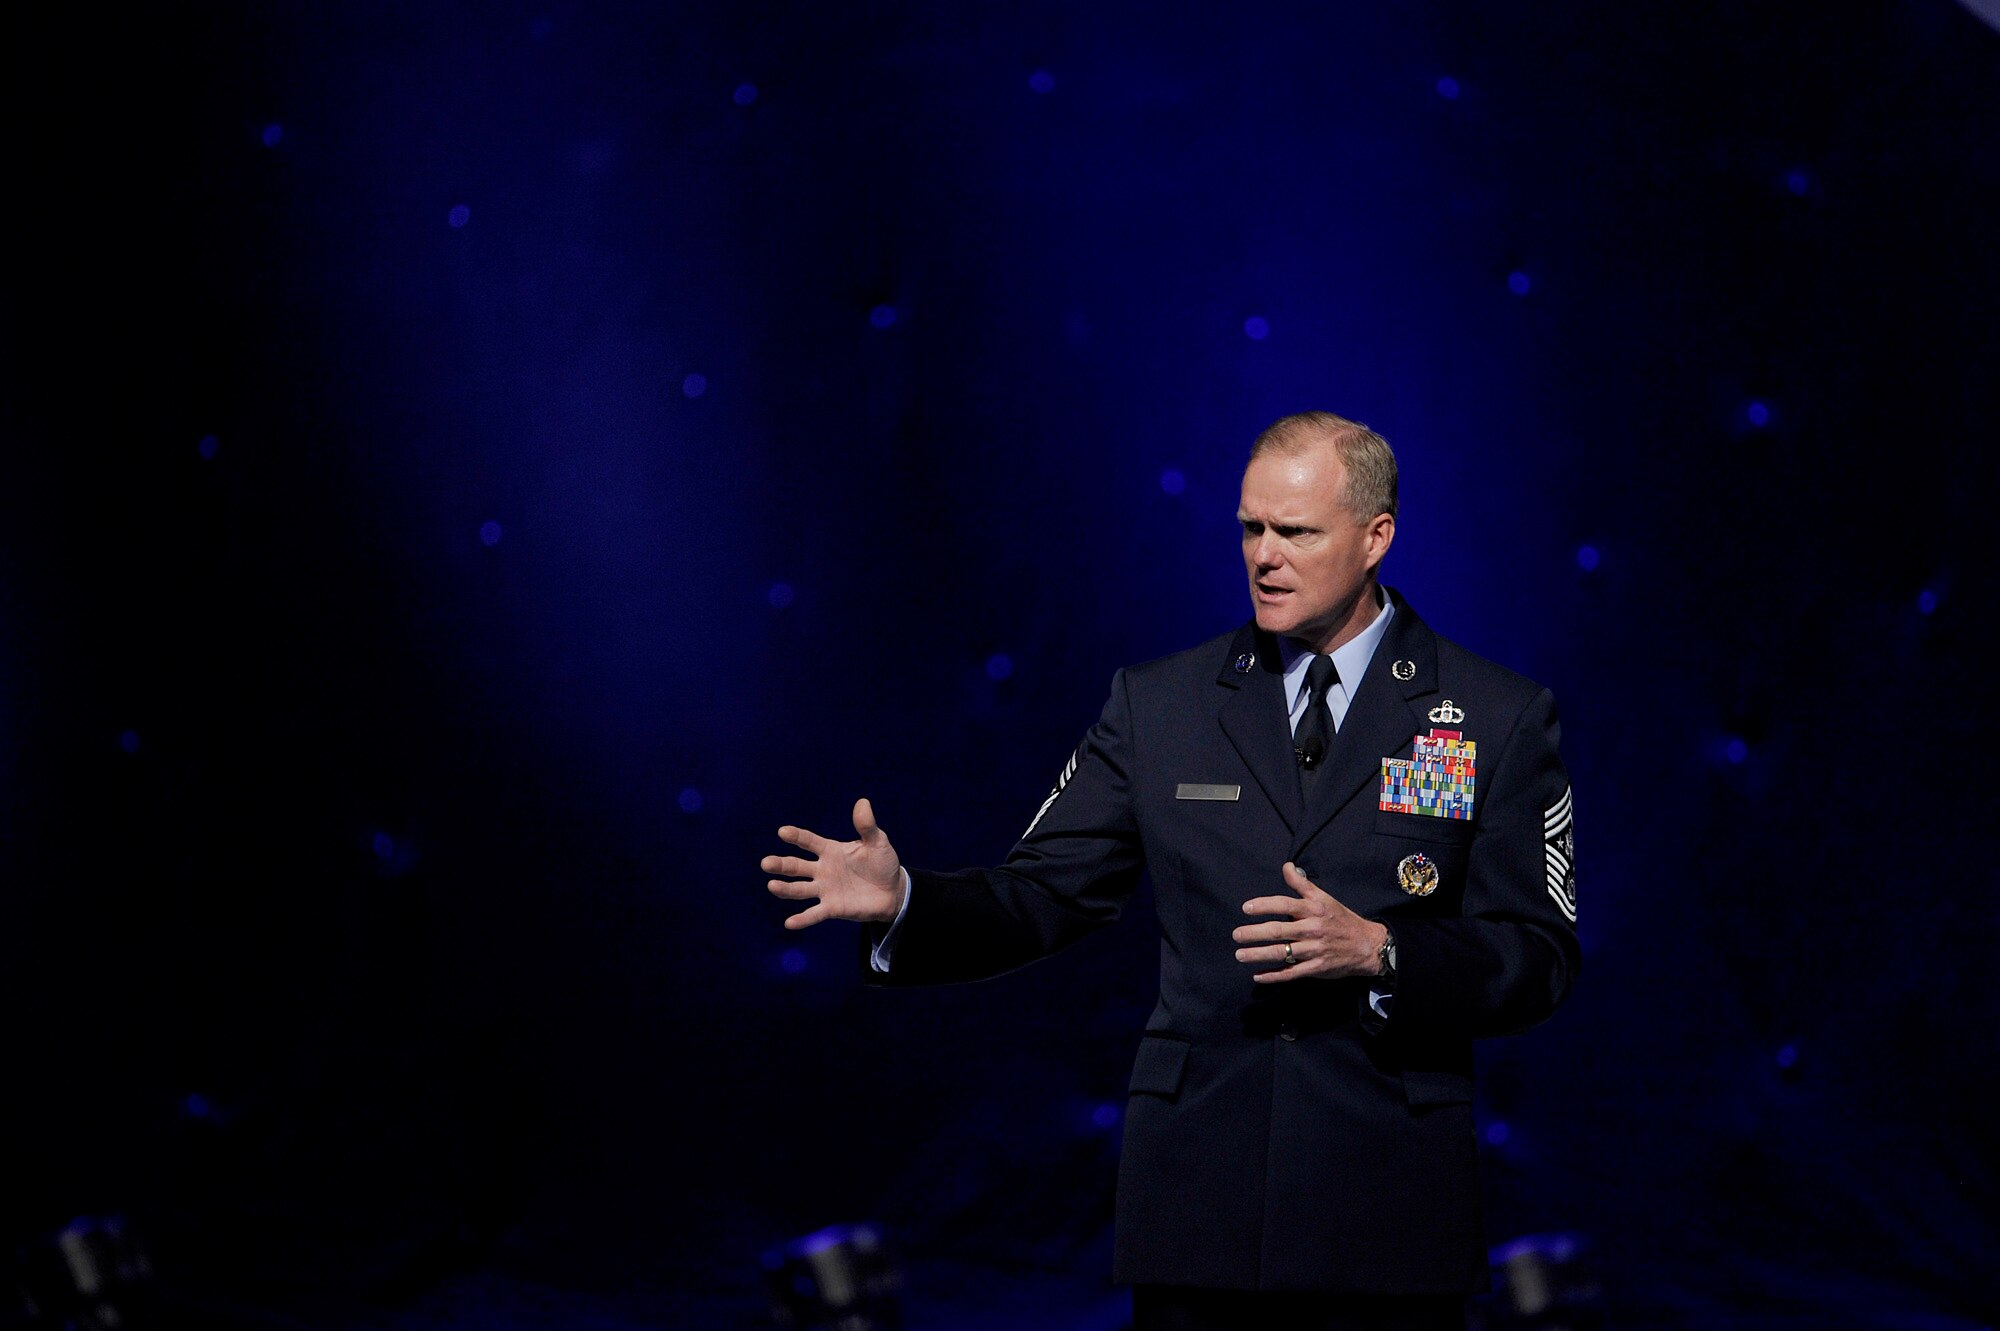 Chief Master Sergeant of the Air Force James A. Cody provides an "Enlisted Perspective" during the 2014 Air Force Association’s Air and Space Conference and Technology Exposition Sept. 16, 2014, in Washington, D.C. Cody focused on the Enlisted Evaluation System, promotions, developing the total force in the coming years, among other issues. (Courtesy photo)